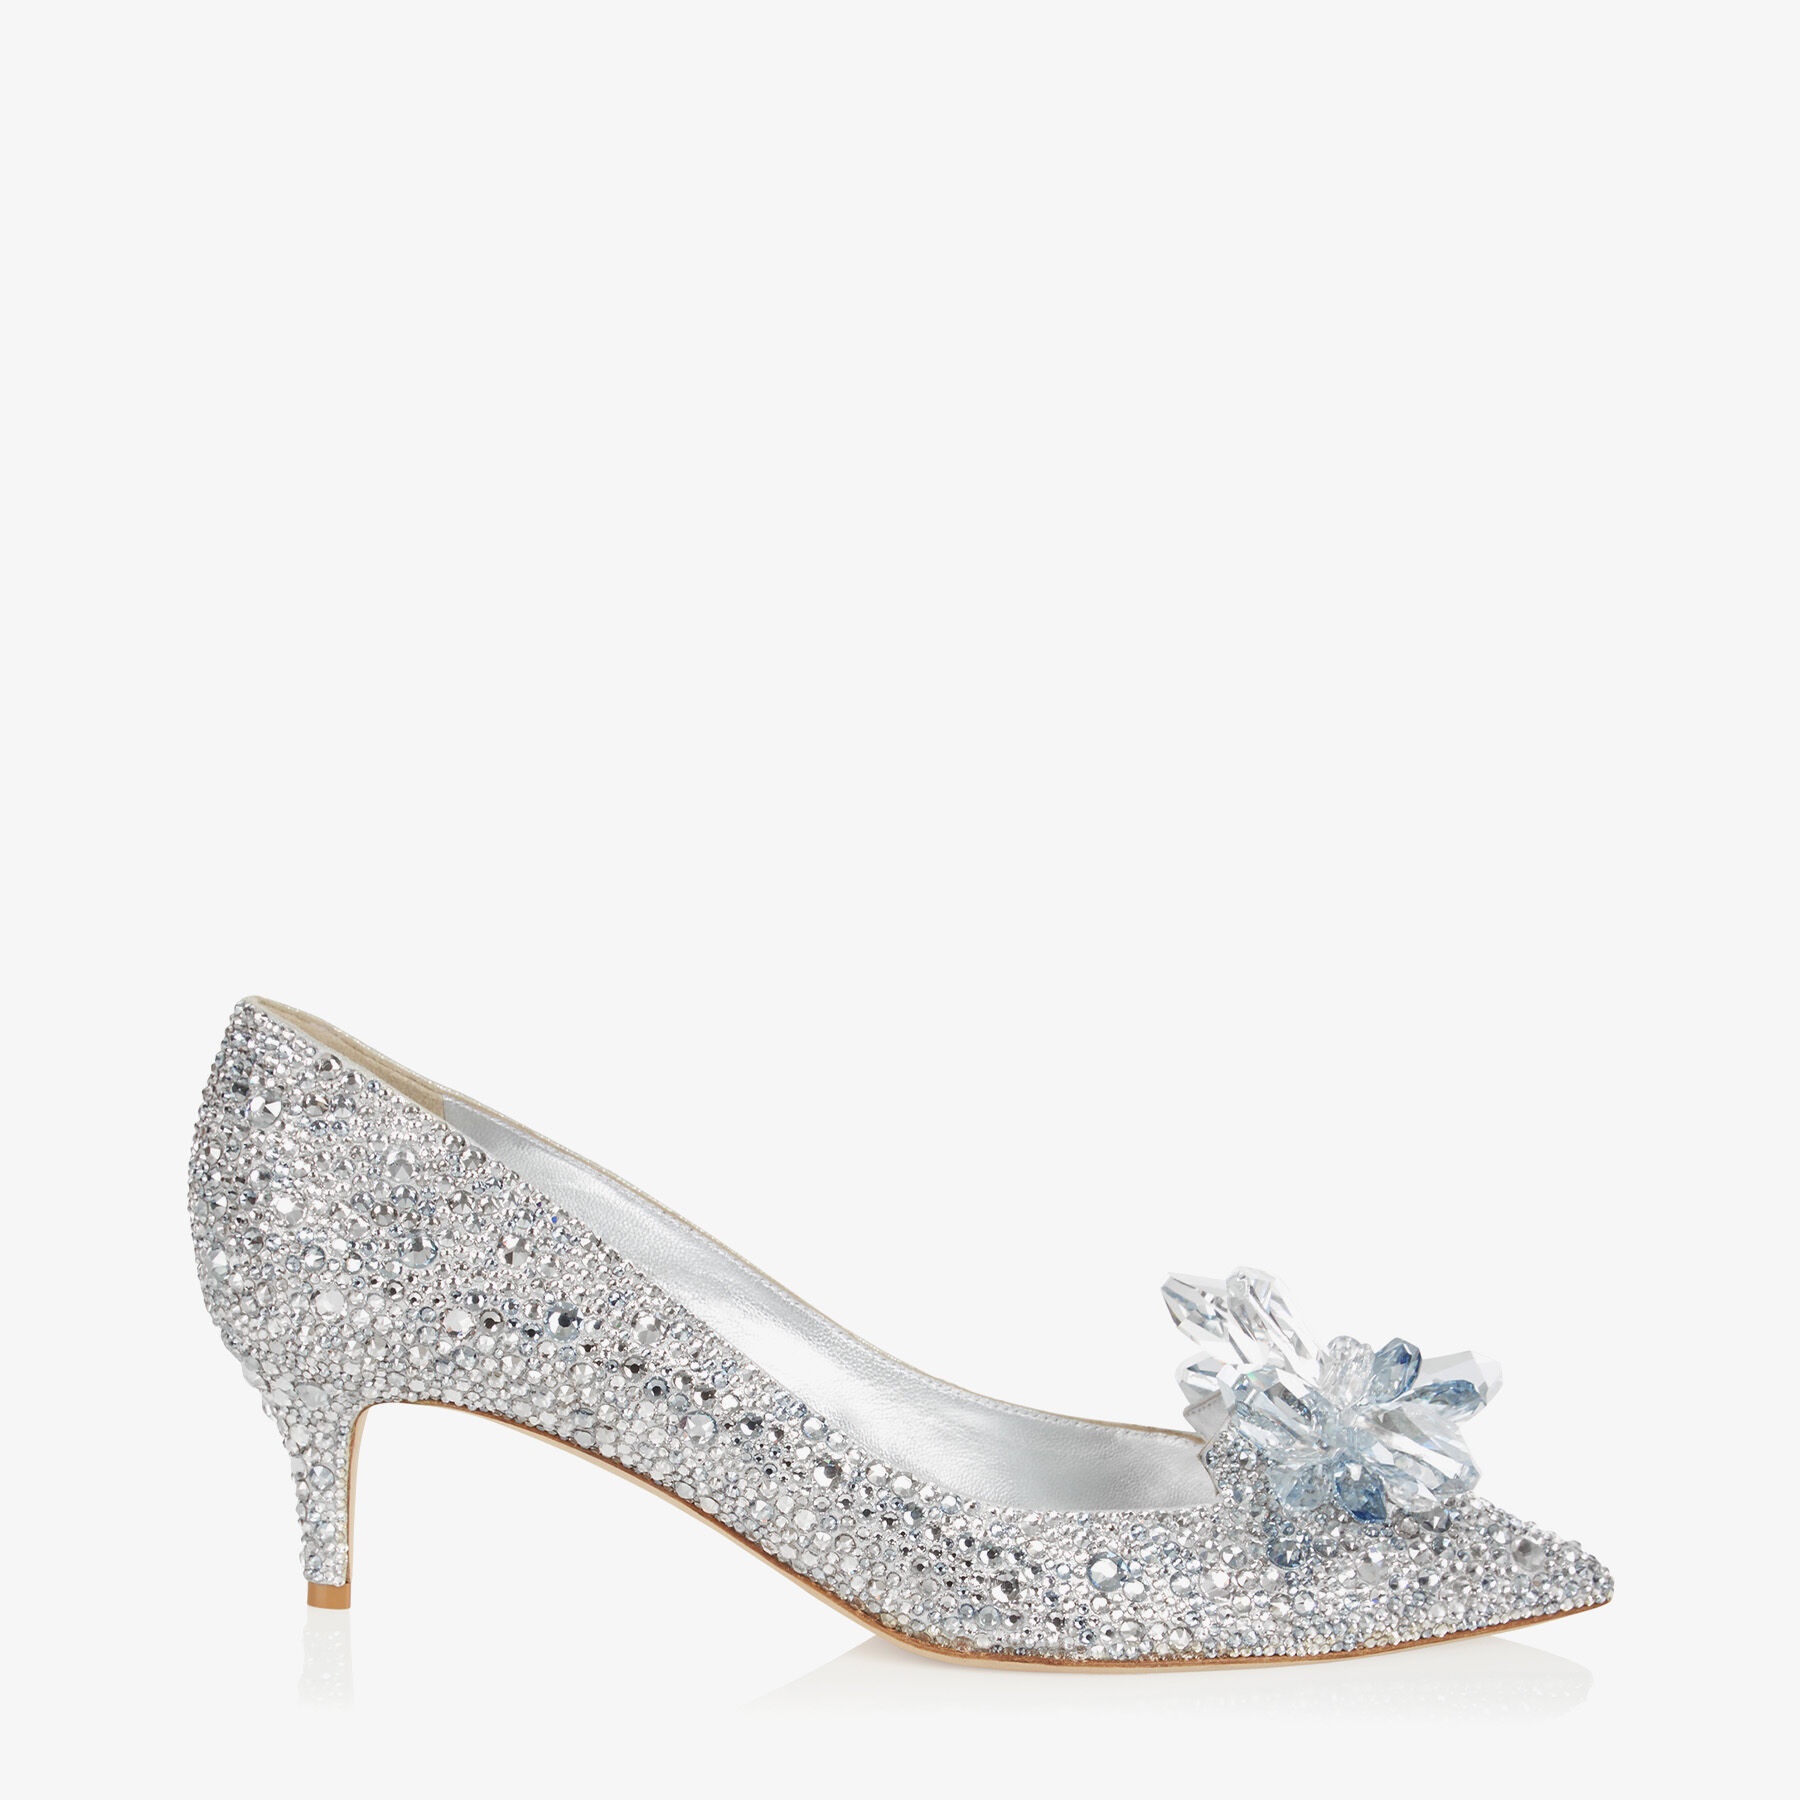 Allure
Crystal Covered Pointy Toe Pumps - 1